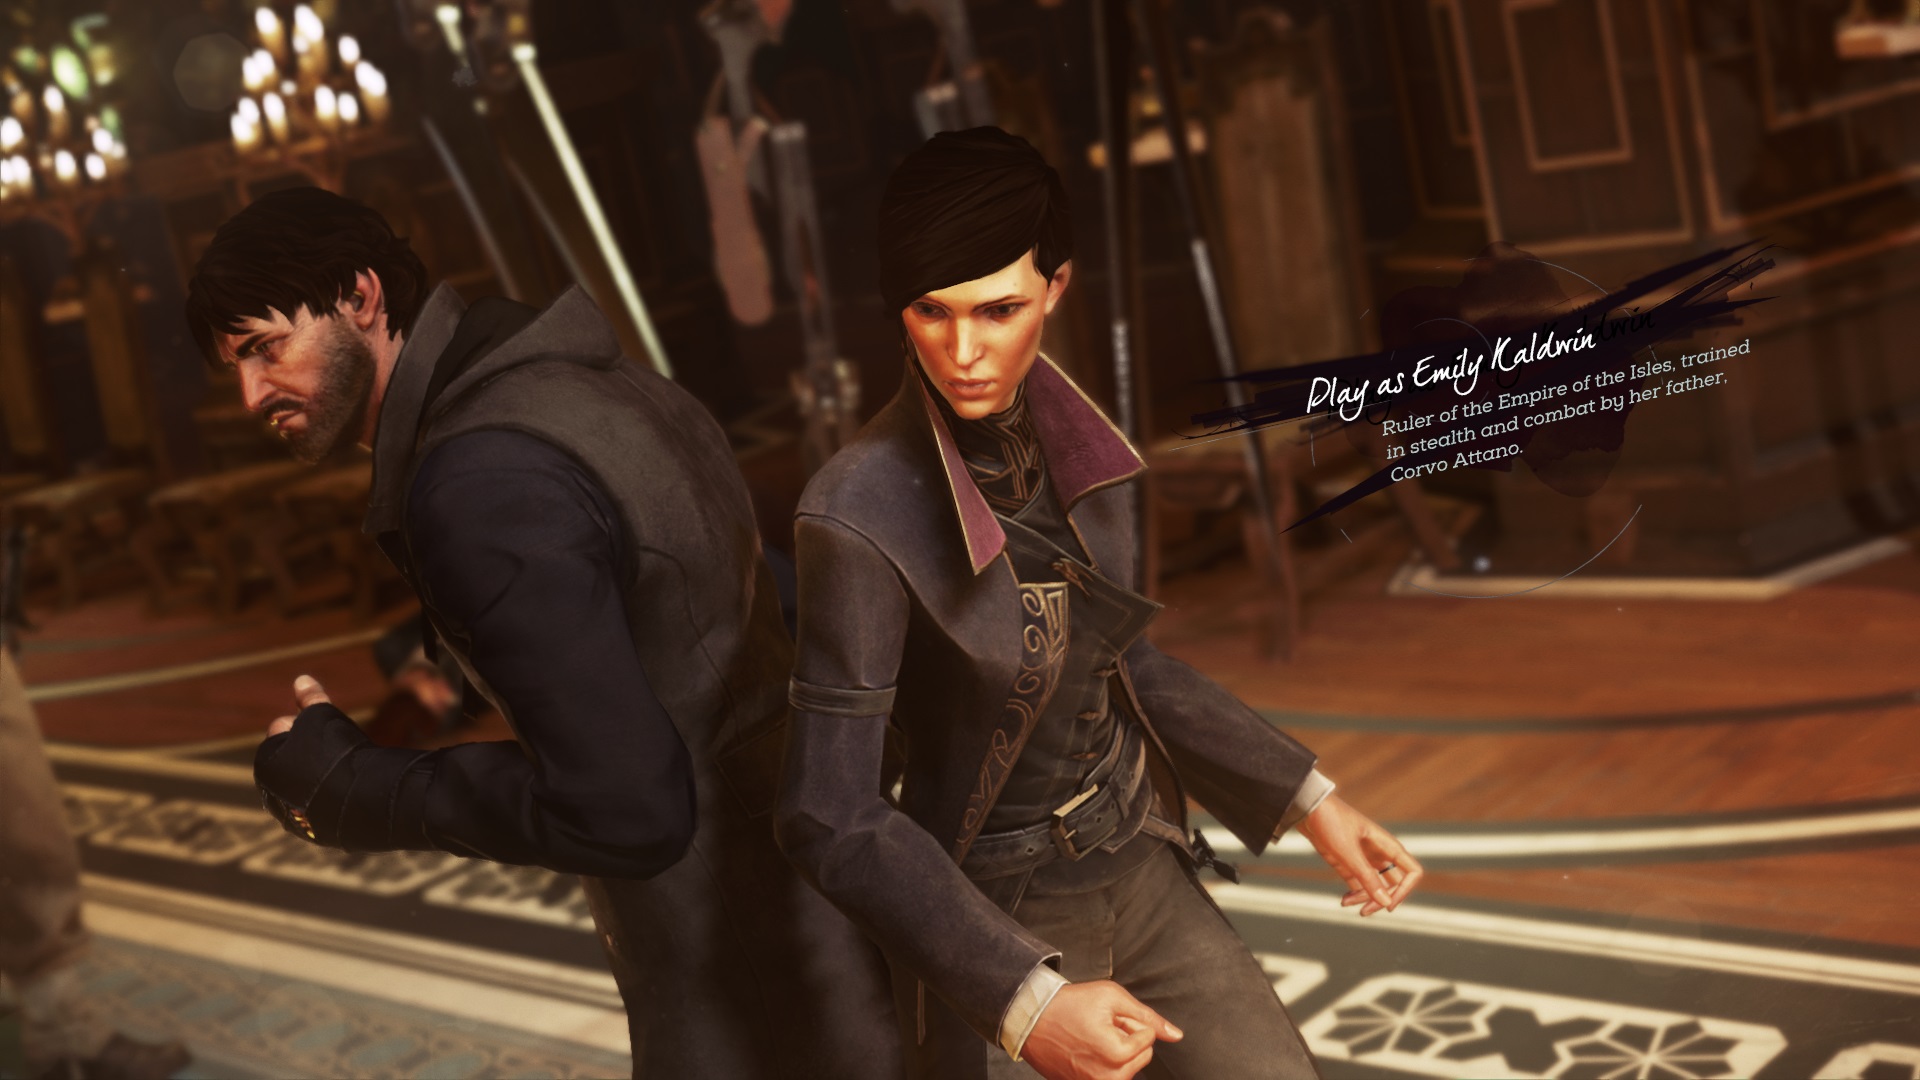 Dishonored 2 Review